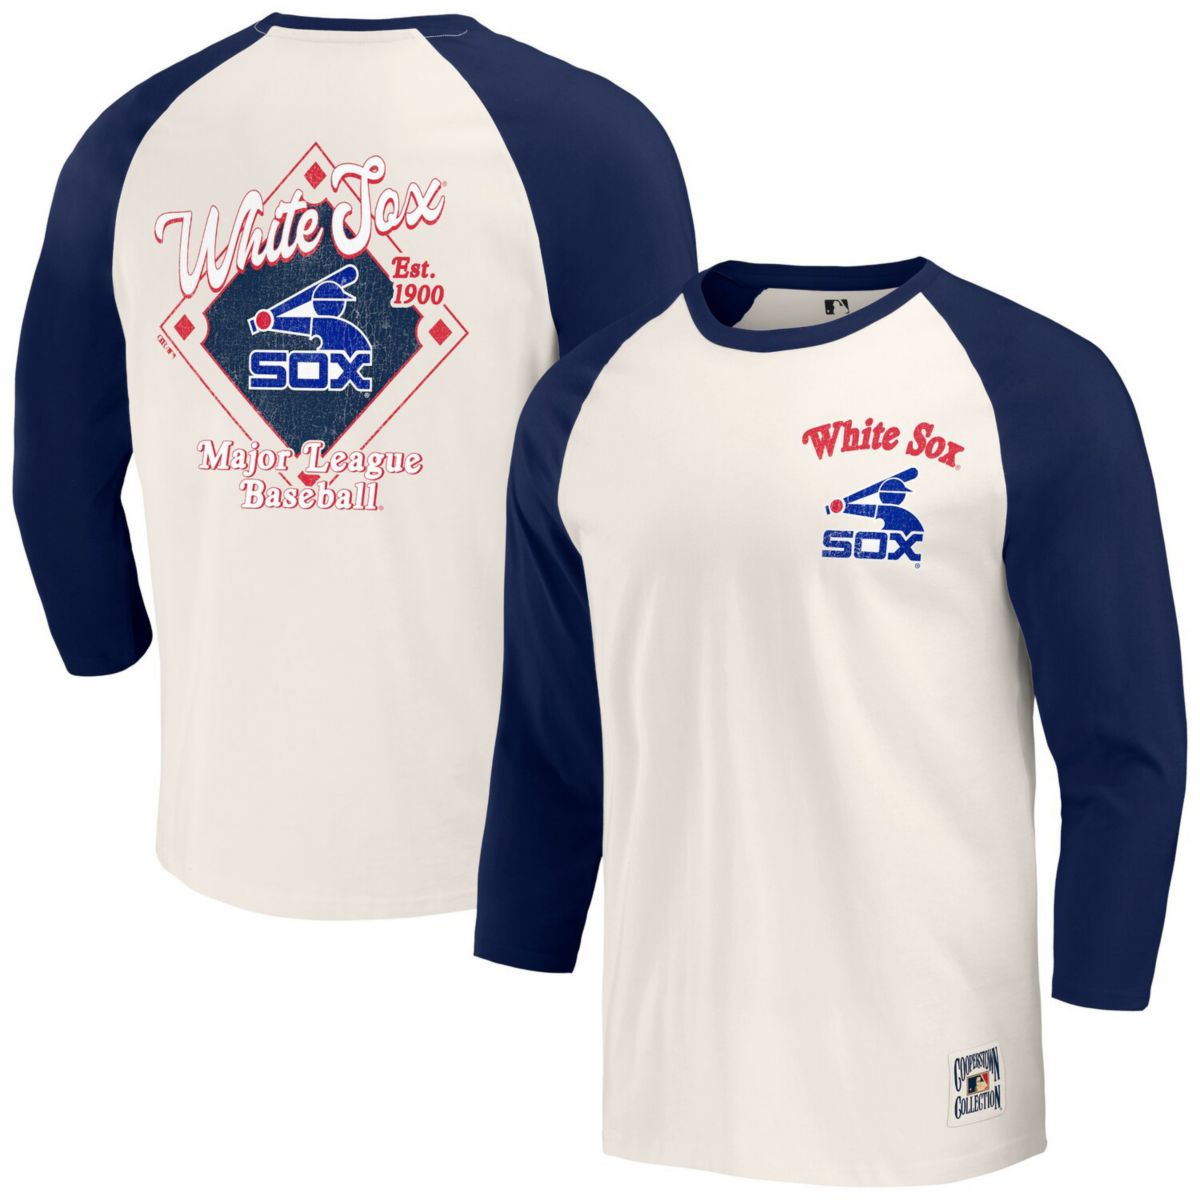 Men's Darius Rucker Collection by Fanatics Navy/White Chicago White Sox Cooperstown Collection Raglan 3/4-Sleeve T-Shirt Darius Rucker Collection by Fanatics